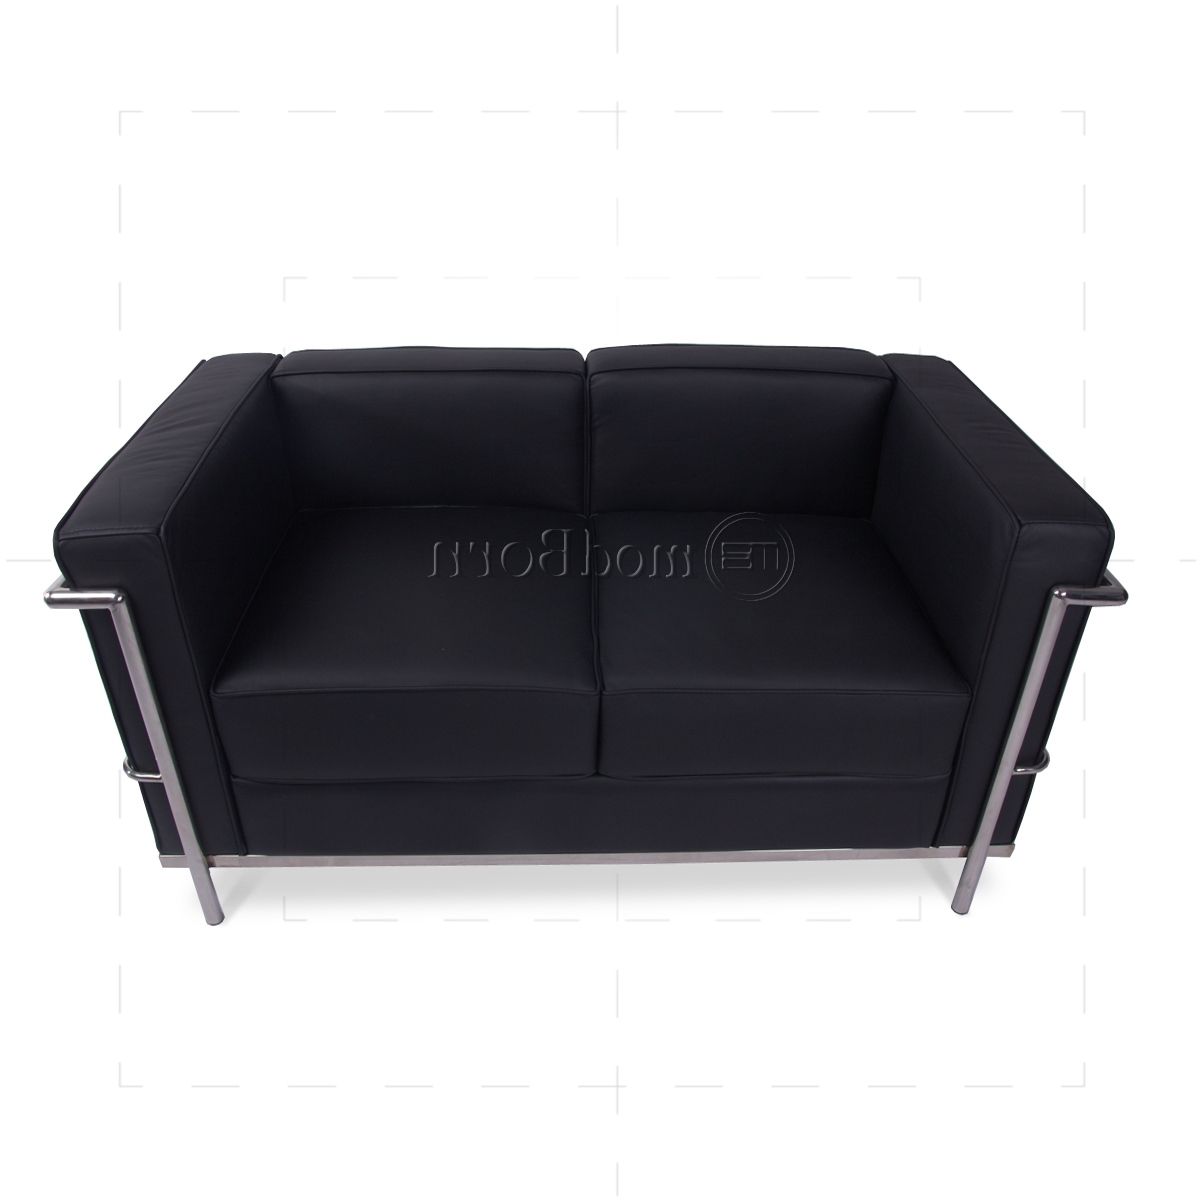 2018 Le Corbusier Style Lc2 Sofa 2 Seater Black Leather – Replica Within Black 2 Seater Sofas (View 10 of 20)